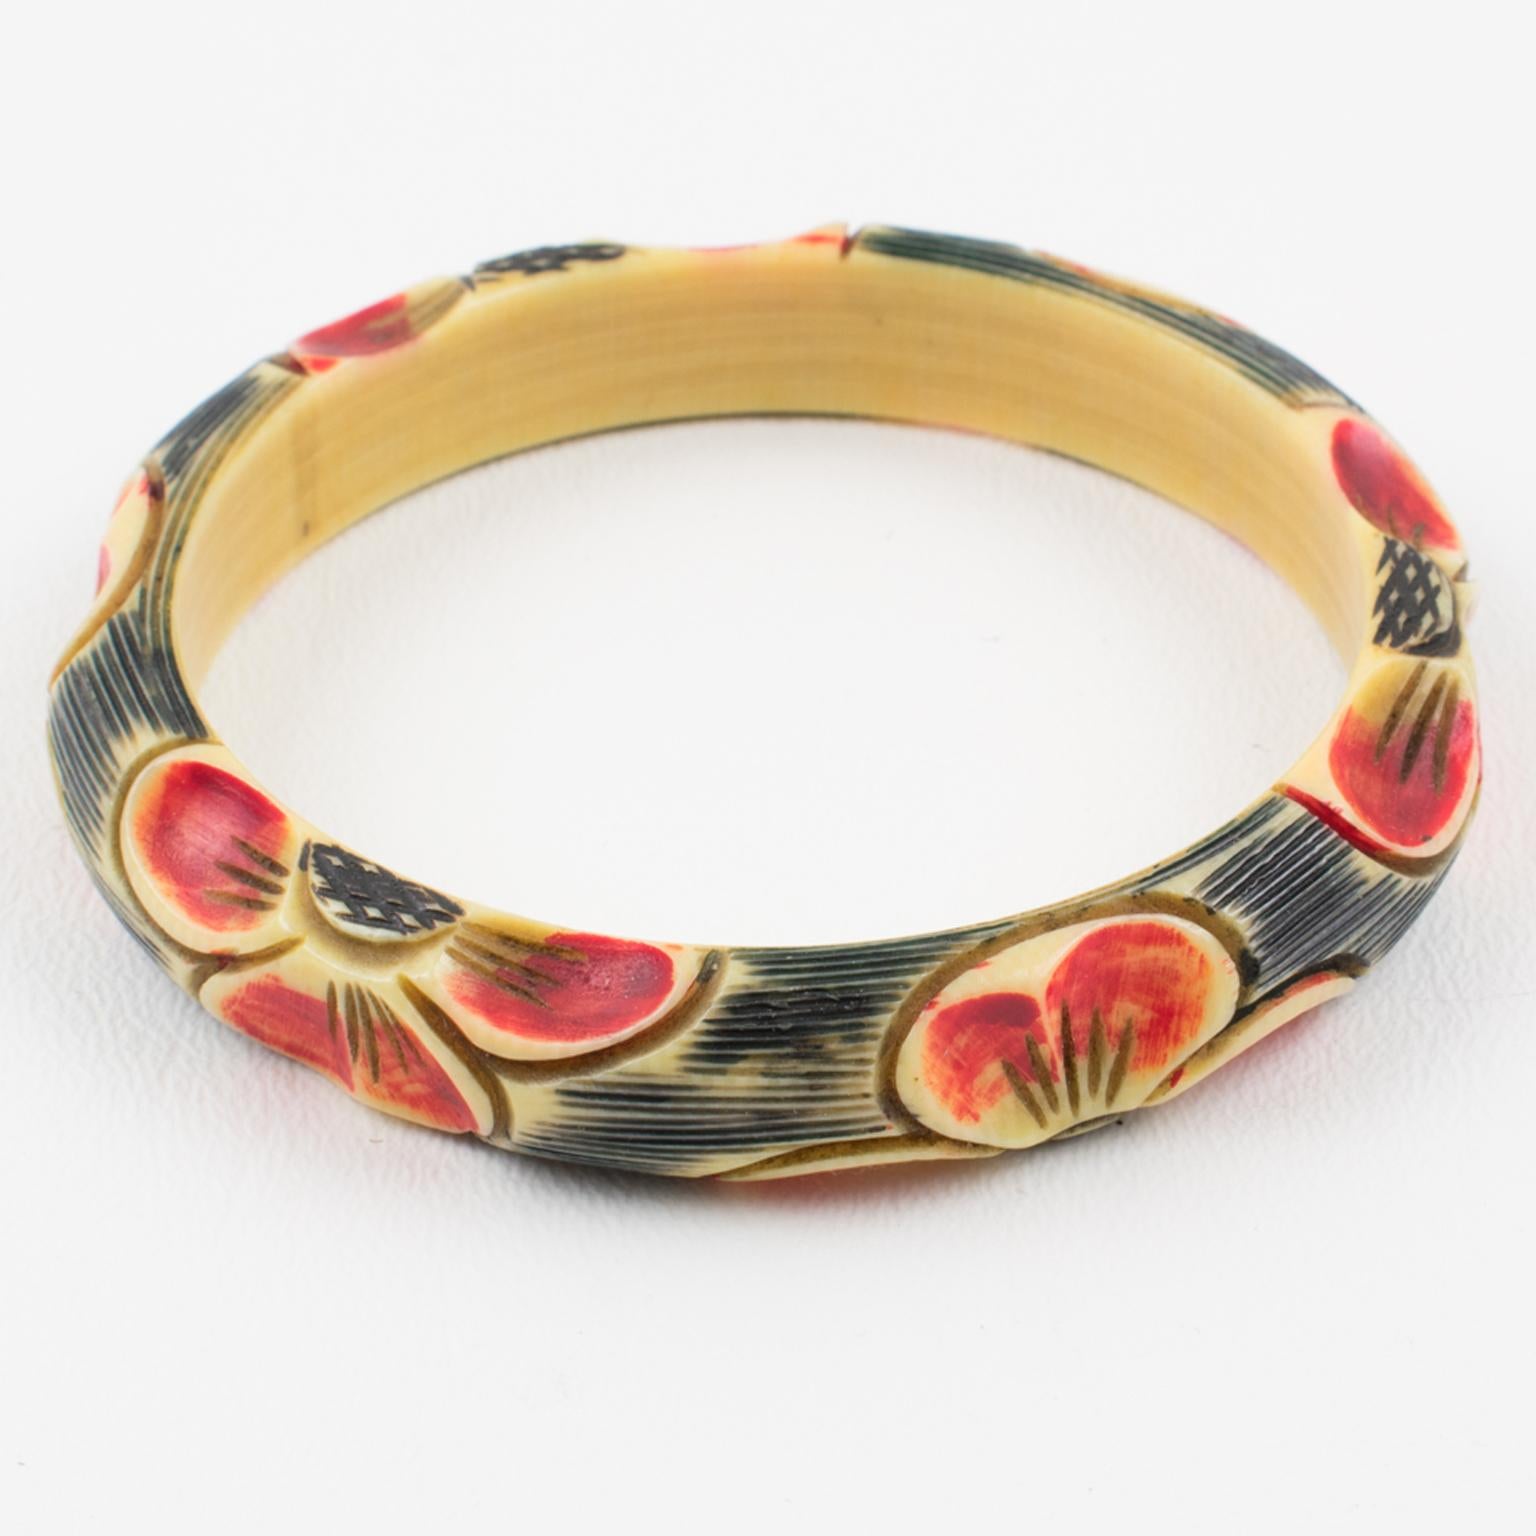 Elegant 1925s Art Deco celluloid bracelet bangle. Features floral design, with six motifs all around the bracelet deeply carved, painted, and stained. A lovely range of assorted colors with off-white, black, and red.
Measurements: Inside across is